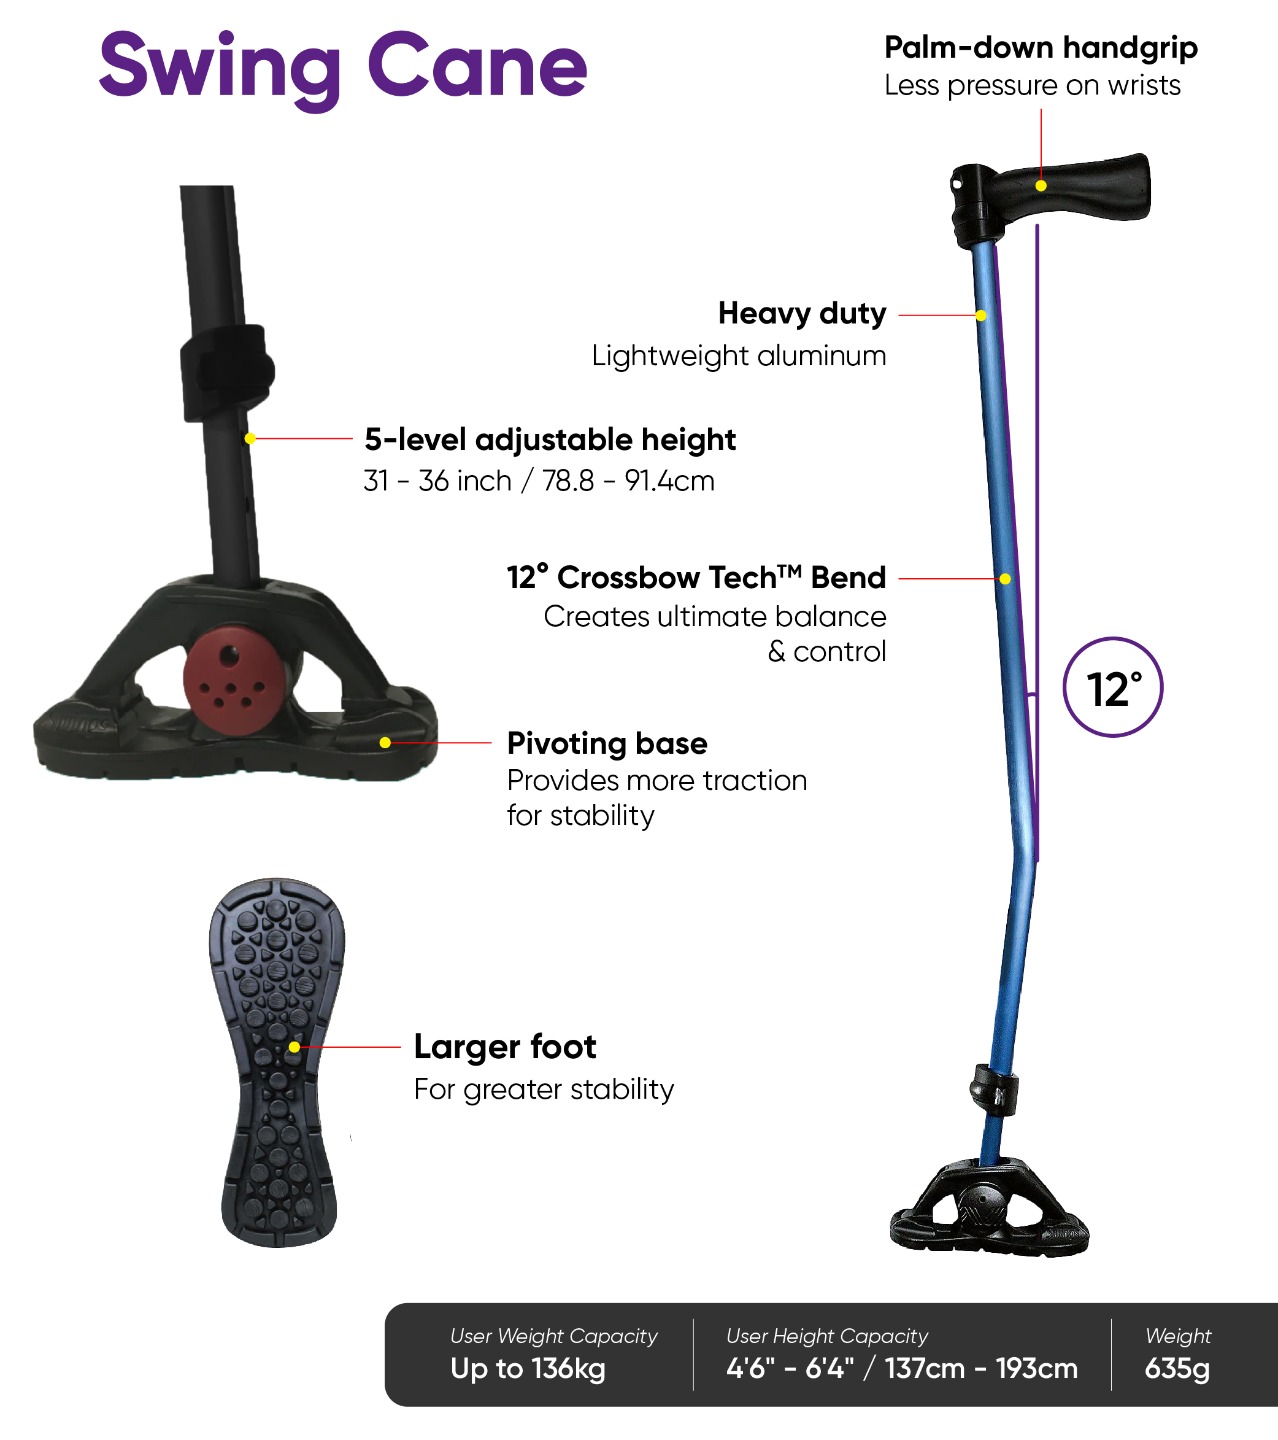 Dynamo Swing Cane, Best Cane For Balance And Stability